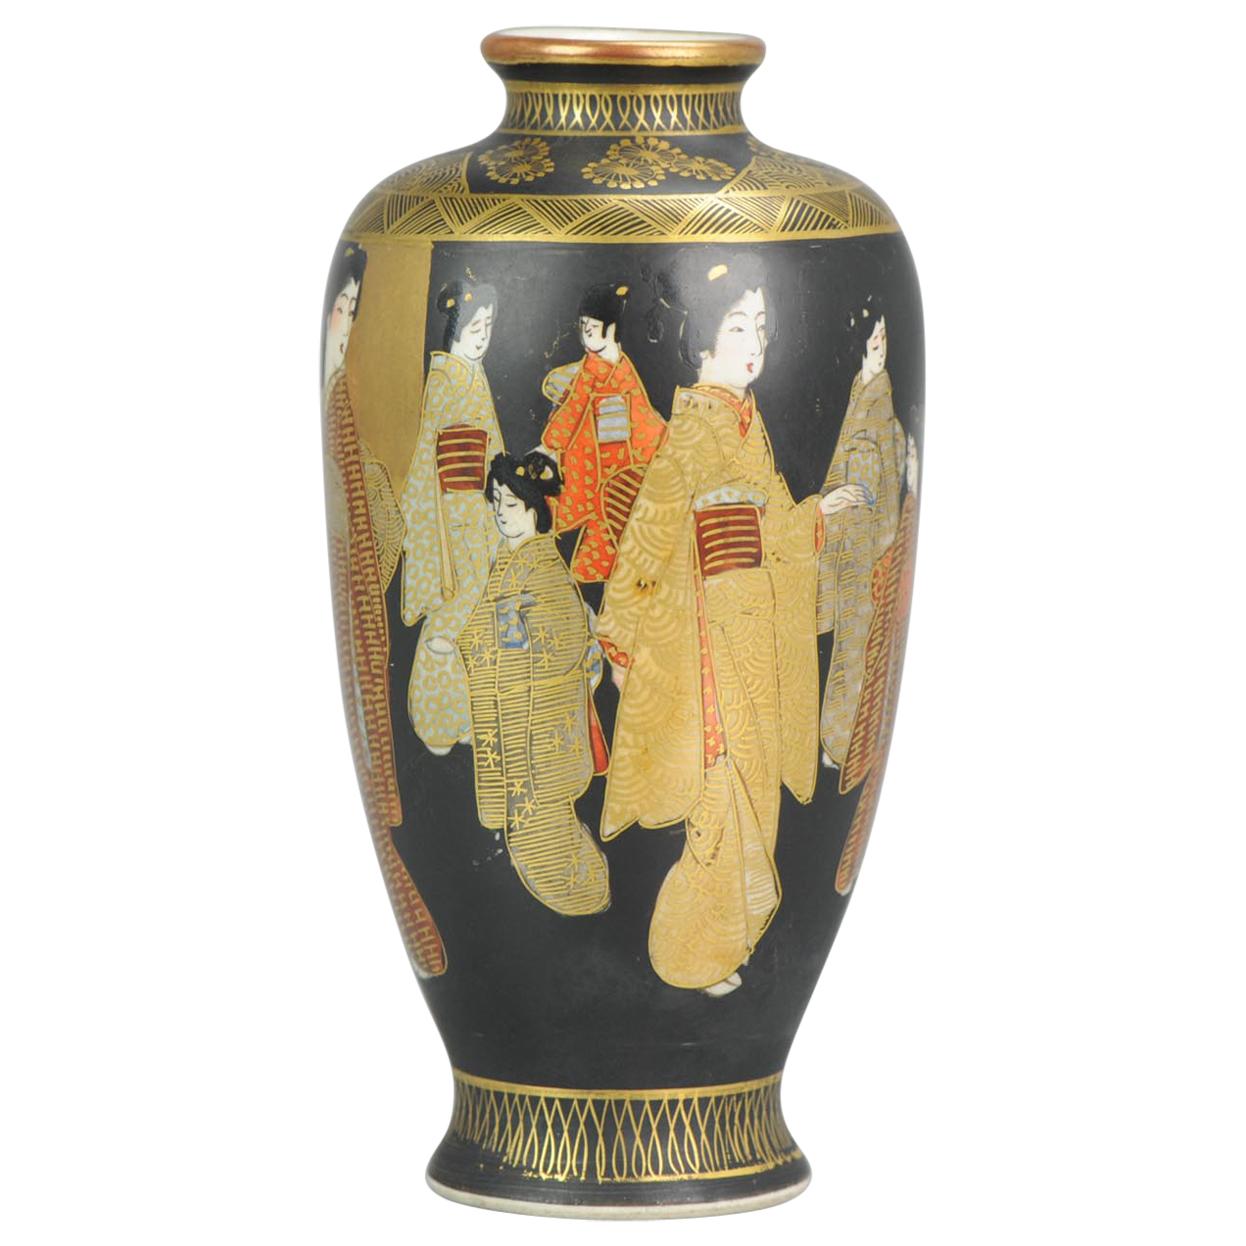 Fabulous Japanese vases with an all around scene of lovely ladies, 19th century.

Marked at base,
?? Yasui

Condition
Overall condition vase 1 perfect, just some minimal enamel loss here and there. Vase 2 1 chip to base rim. Size 125mm